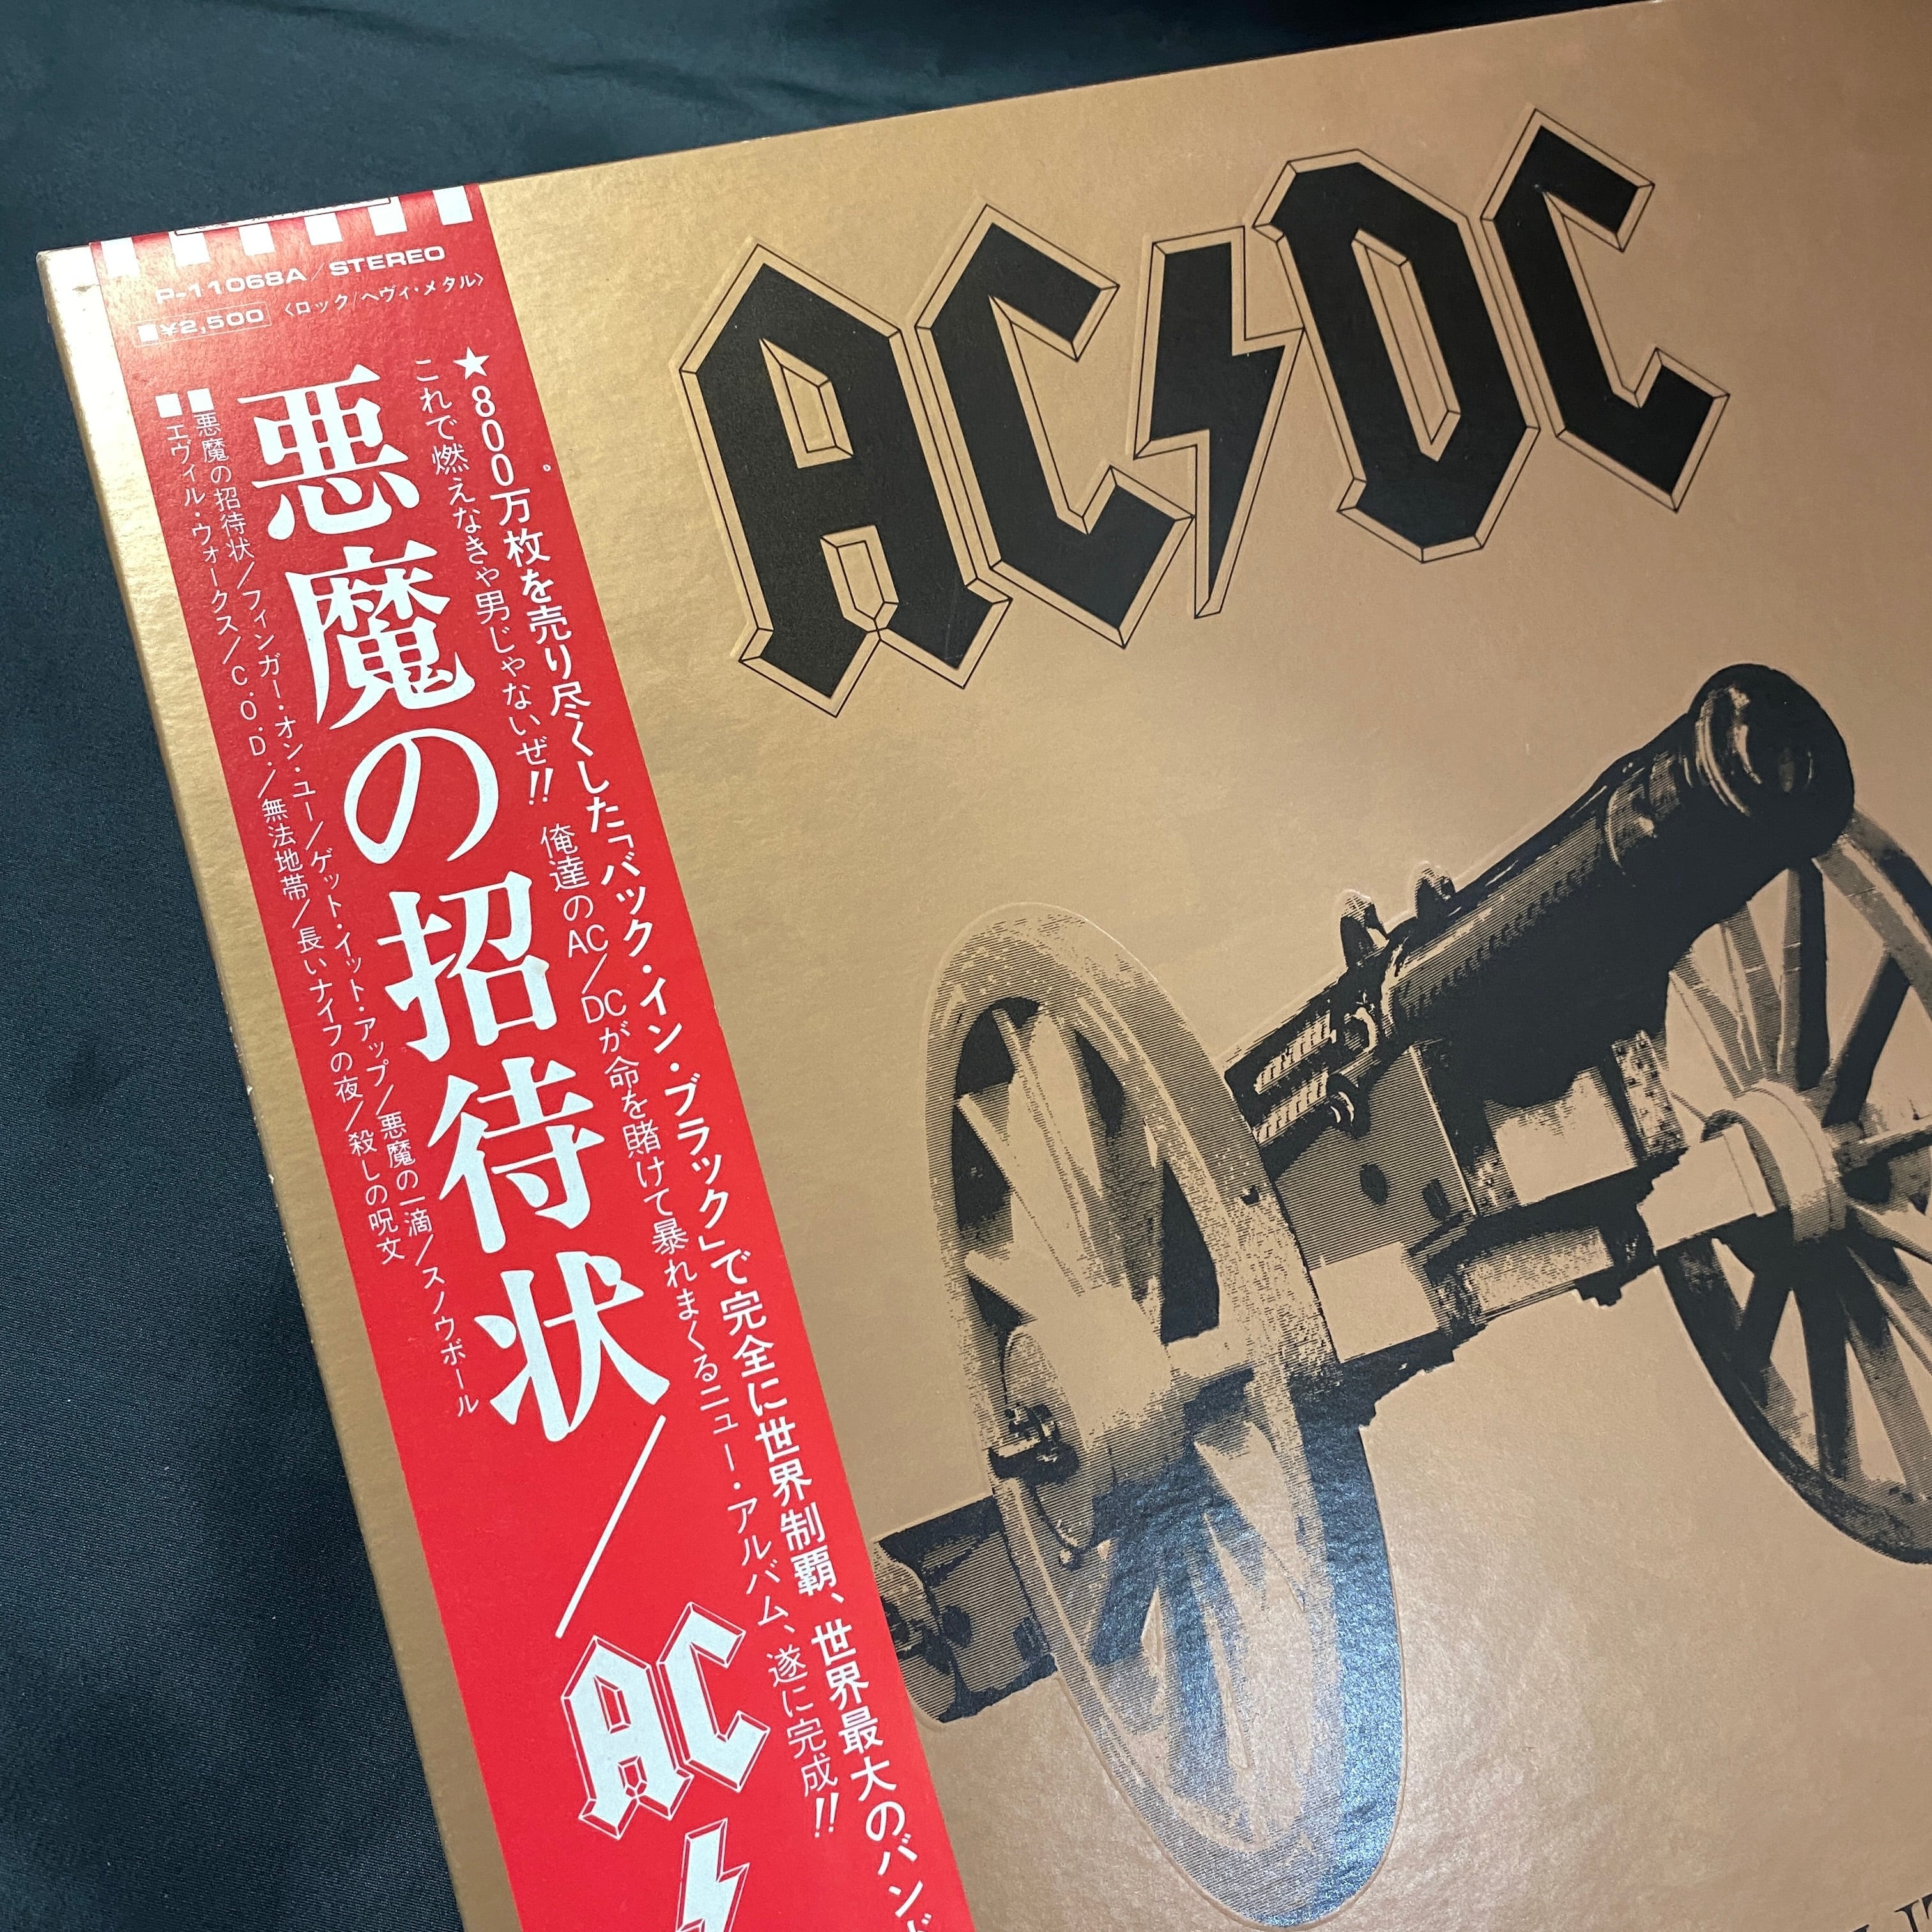 AC/DC - 悪魔の招待状 | TOO MUCH RECORD